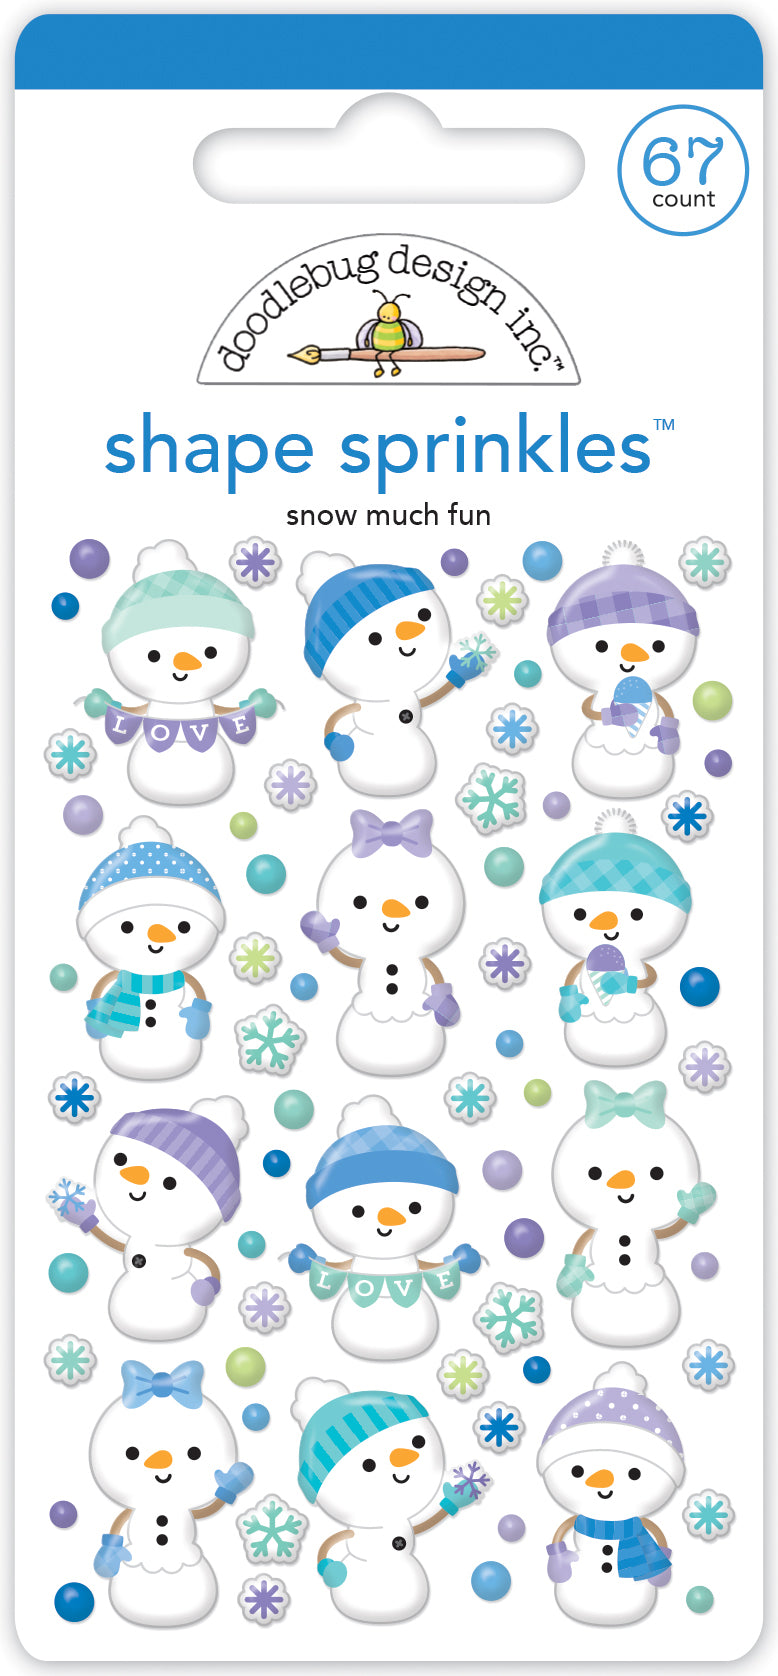 Snow Much Fun Epoxy Snowman Shaped Sprinkles Stickers